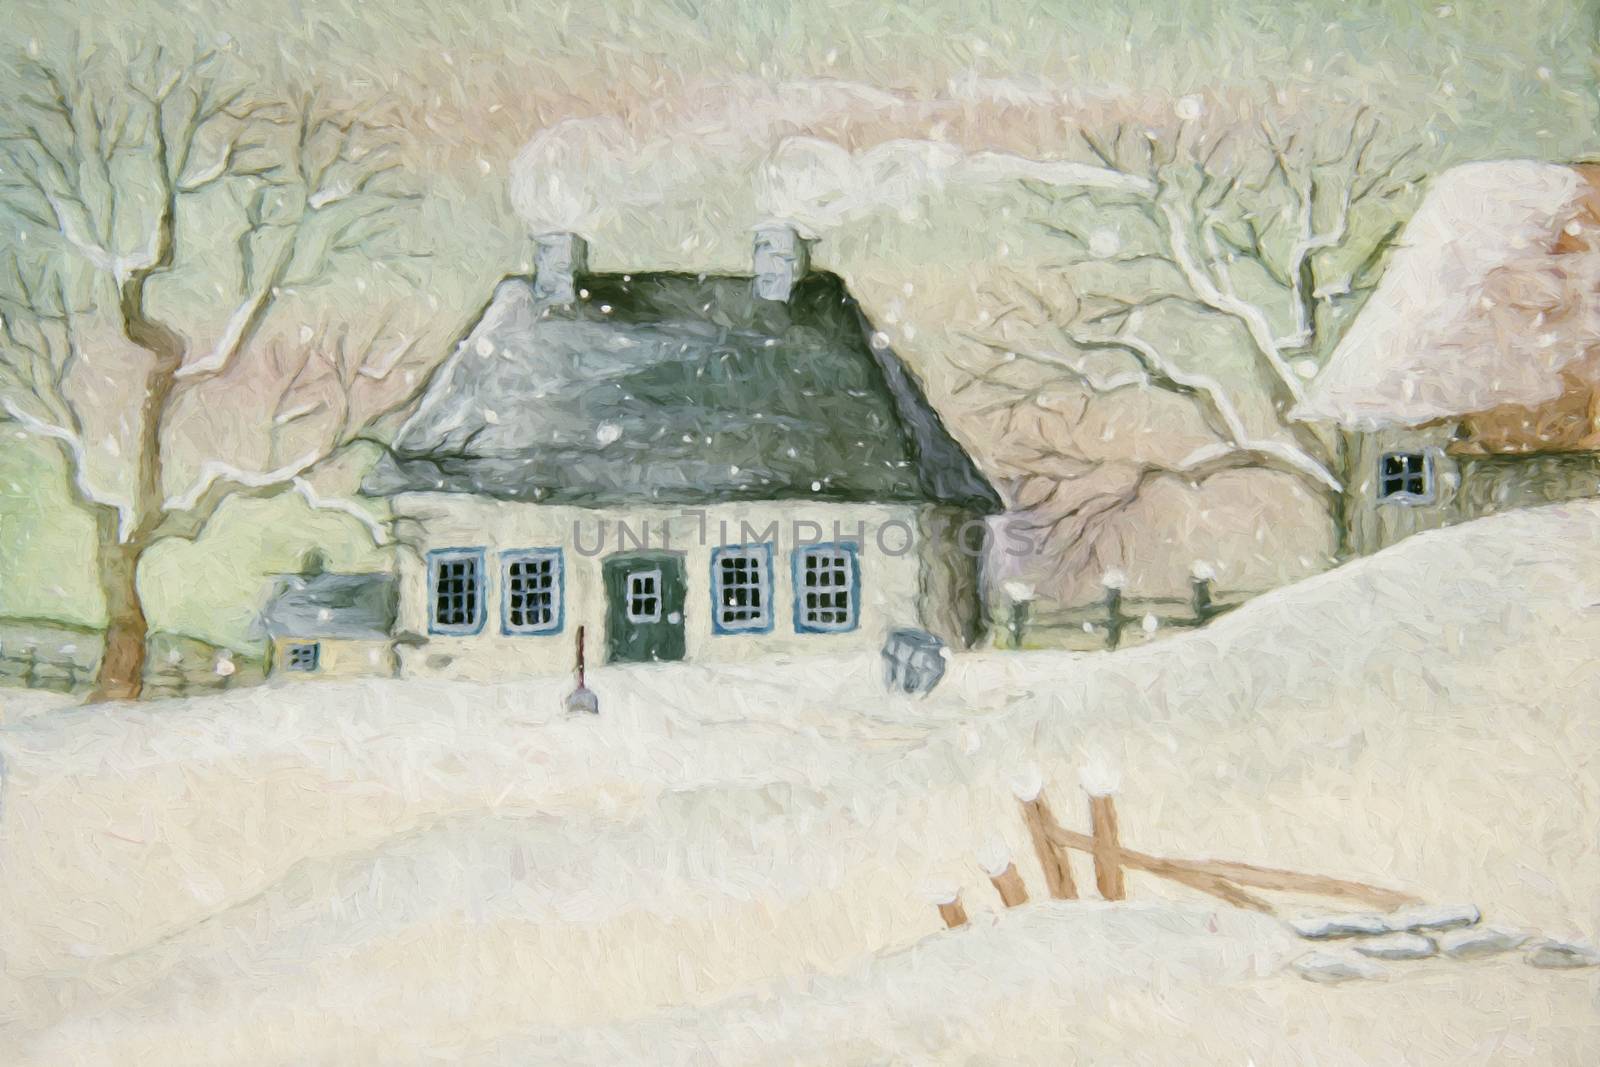 Old house in the snow, painted digitally by Sandralise